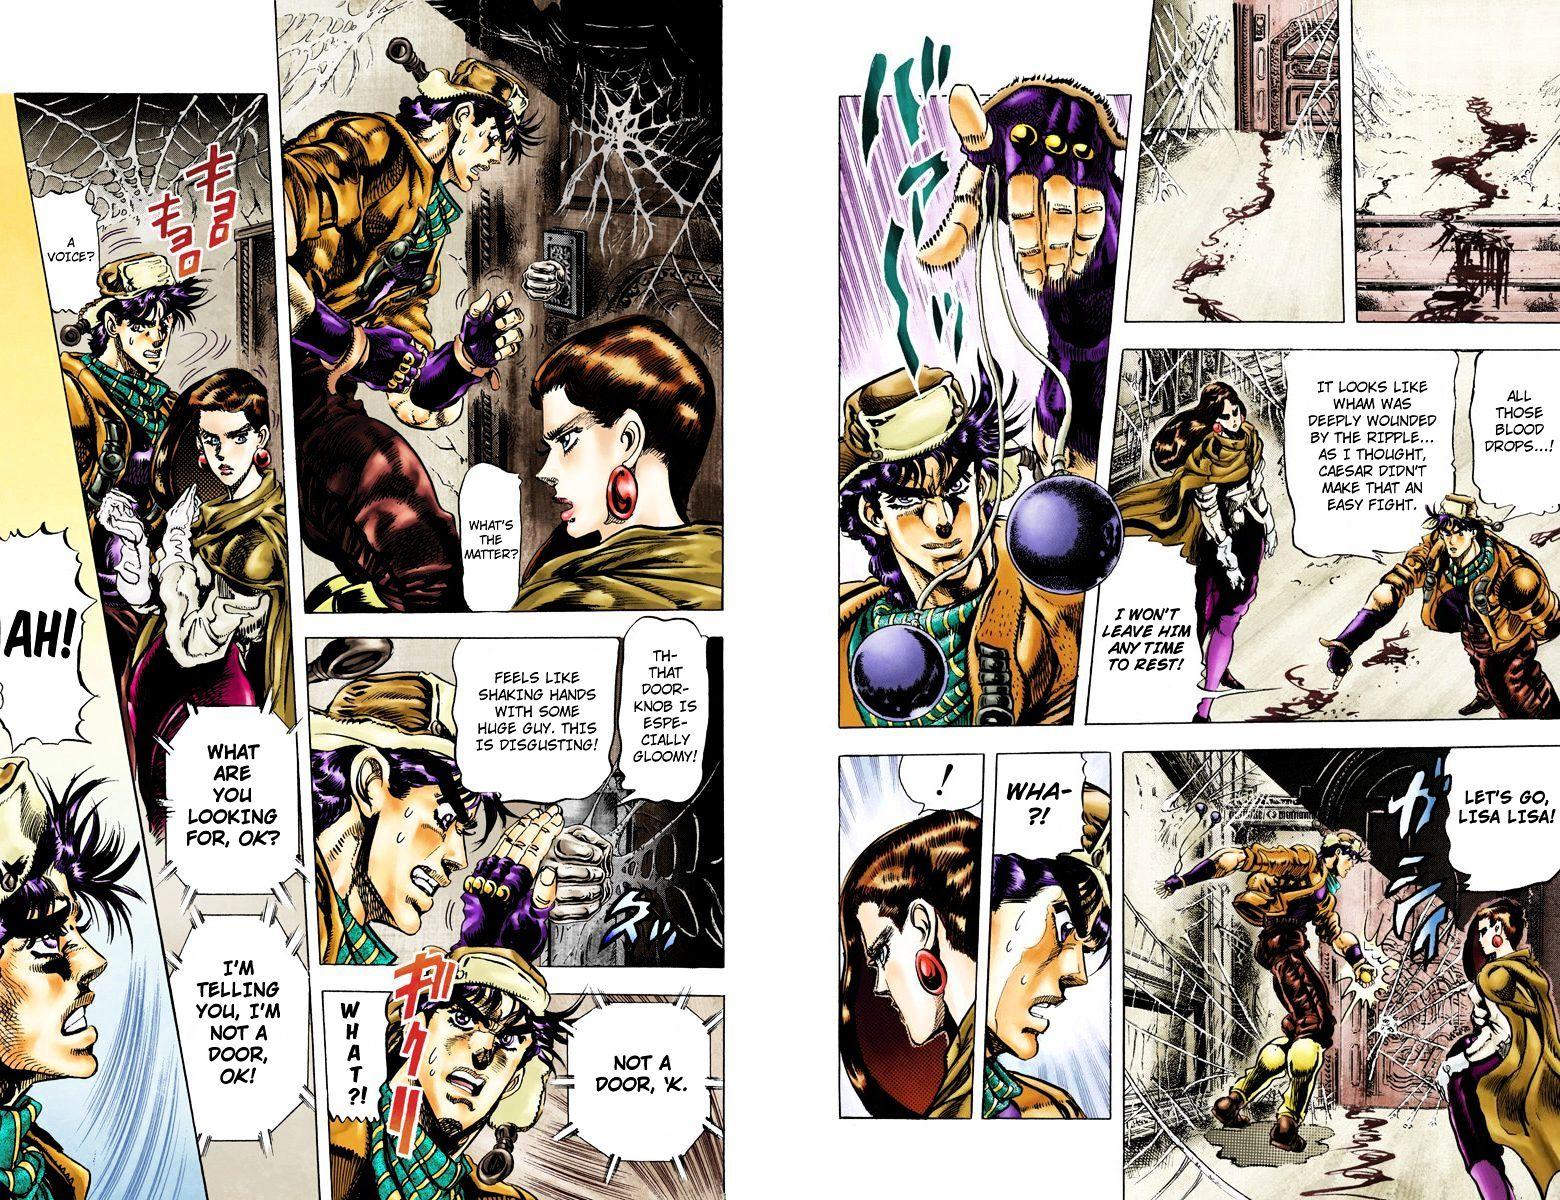 Jojo's Bizarre Adventure Vol.10 Chapter 94 : Lisa Lisa And Her Silk Dance (Official Color Scans) page 3 - 